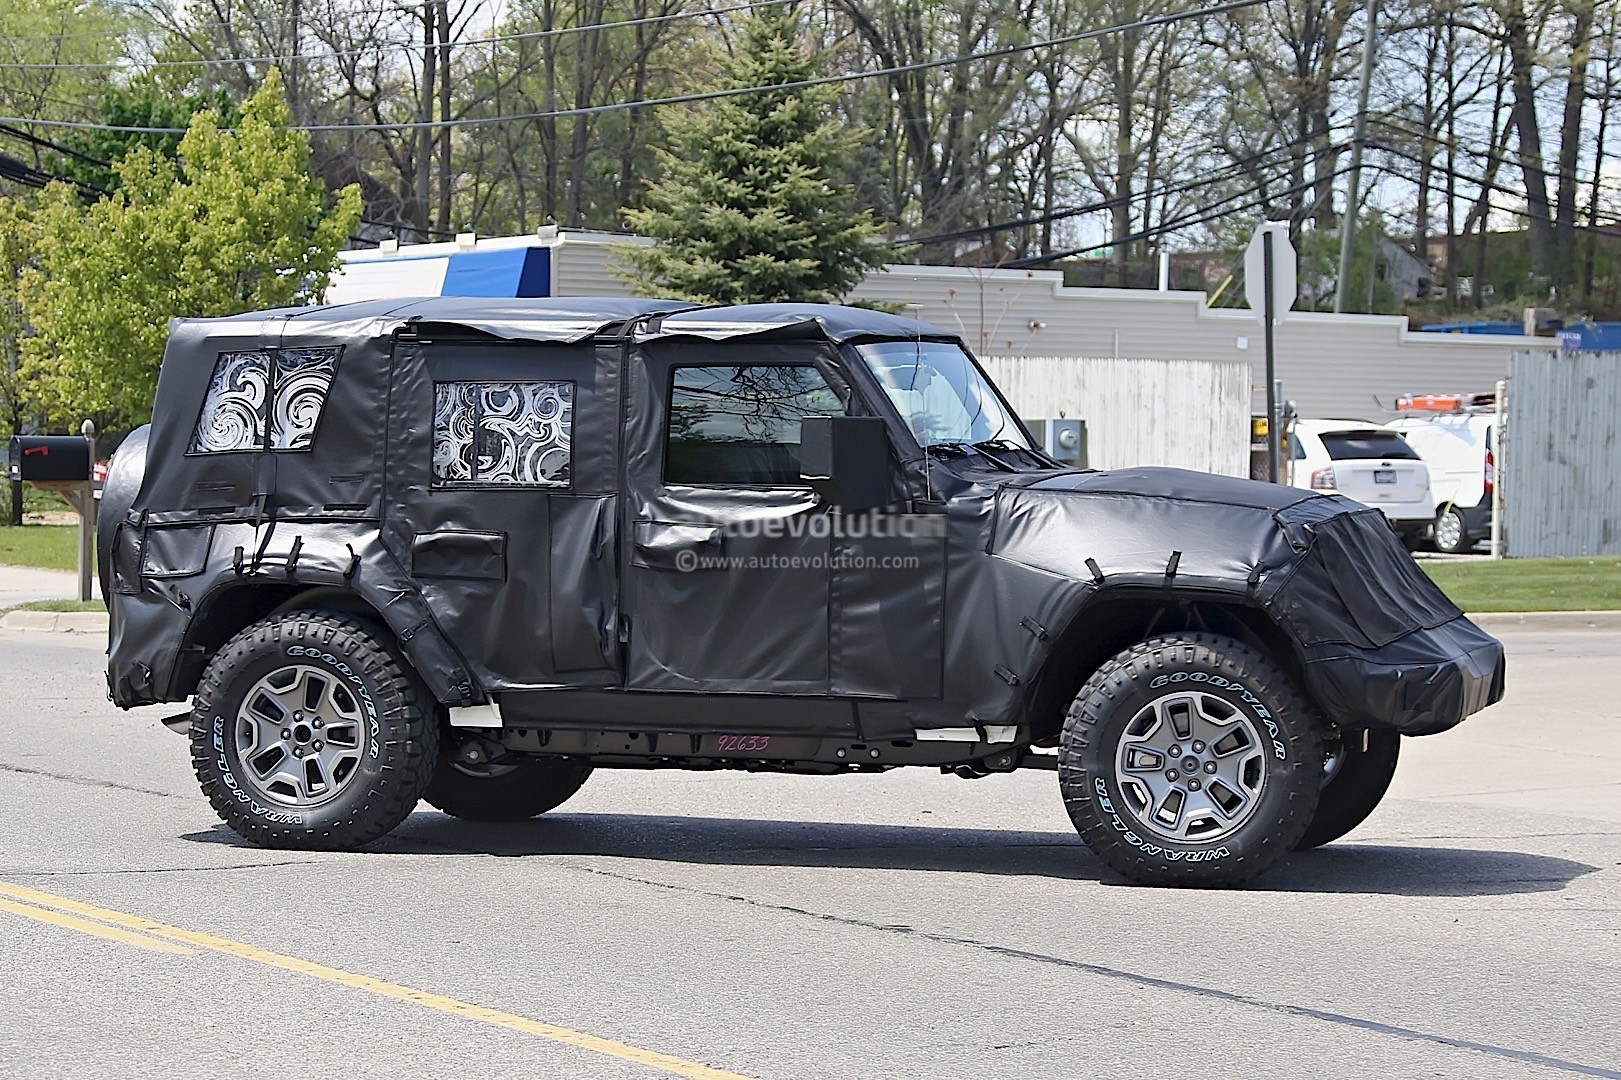 2018 Jeep Wrangler (JL) With Six-Speed Manual Transmission Confirmed -  autoevolution